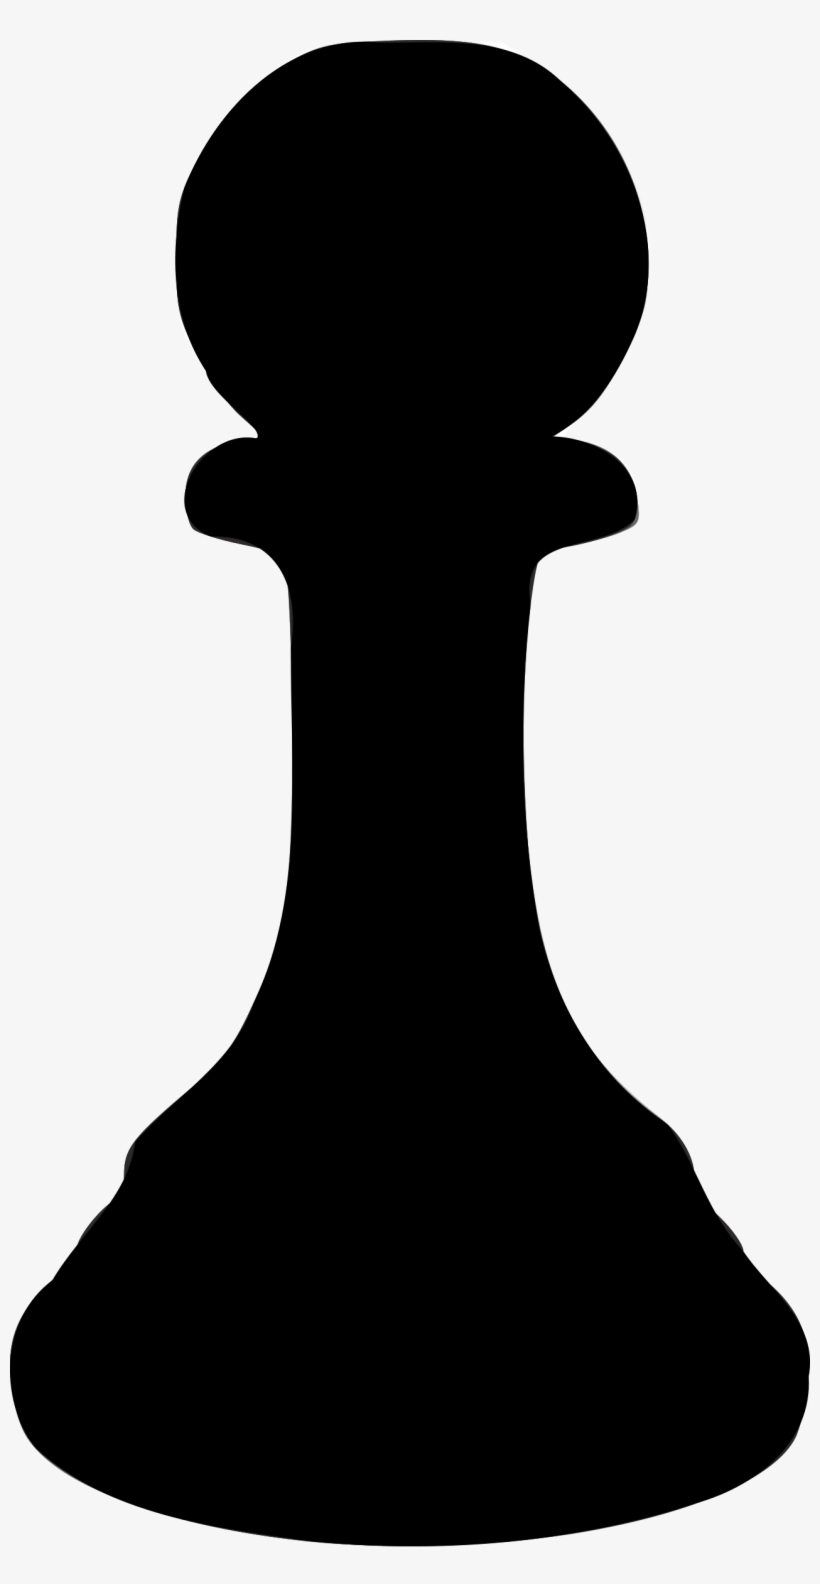 Chess Pawn Black Silhouette Piece Image - User Default Image Png, transparent png #10069386